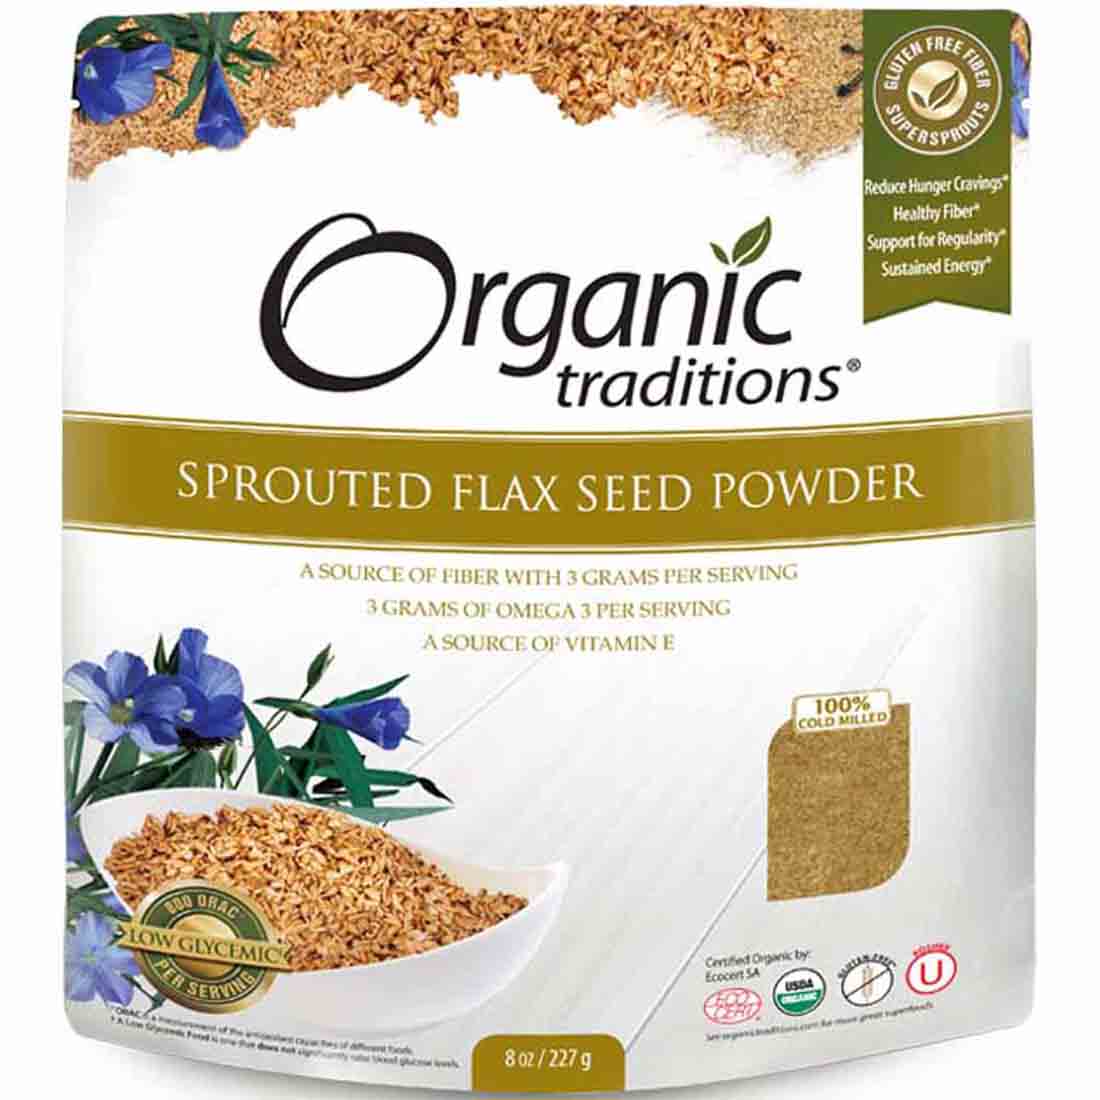 Organic Traditions Sprouted Flax Seed Powder